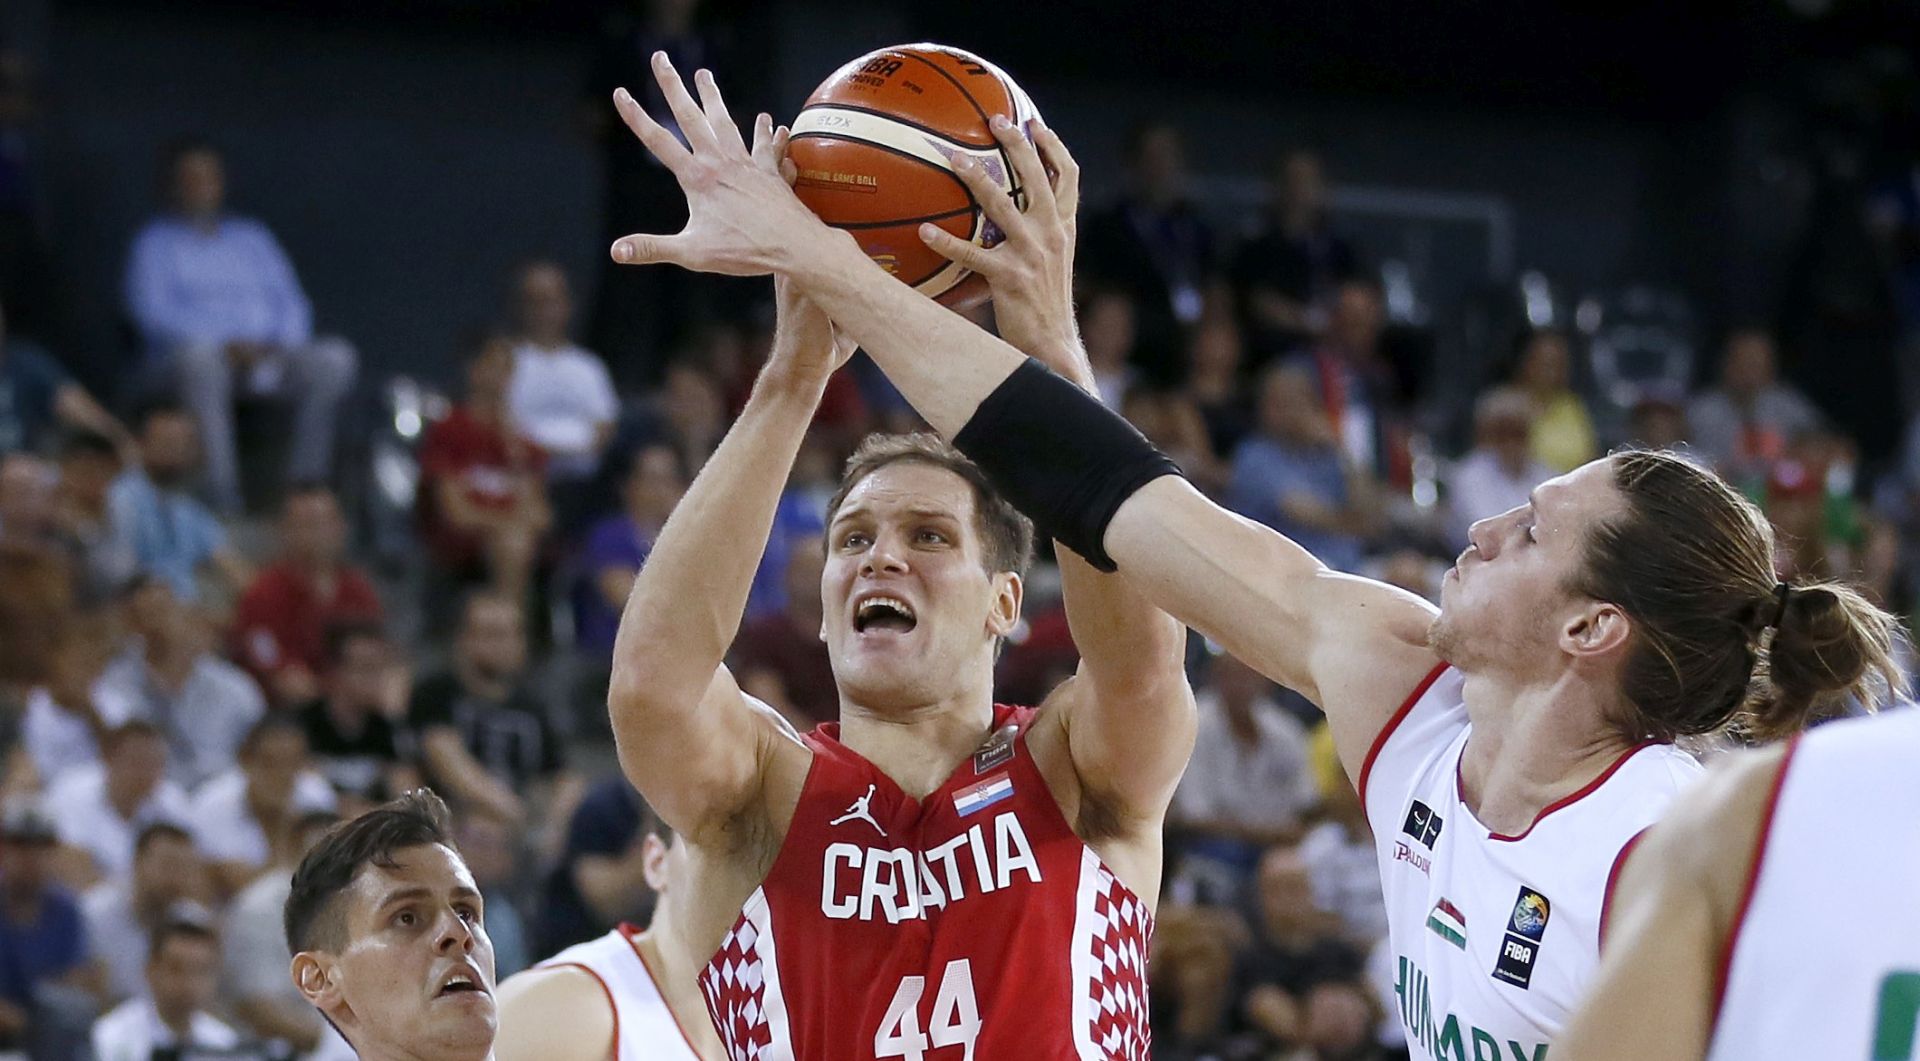 epa06176942 Bojan Bogdanovic (C) of Croatia in action with Hungary's Andras Rujak (L) and Akos Keller (R) during the EuroBasket 2017 group C match between Hungary and Croatia, in Cluj Napoca, Romania, 01 September 2017.  EPA/ROBERT GHEMENT